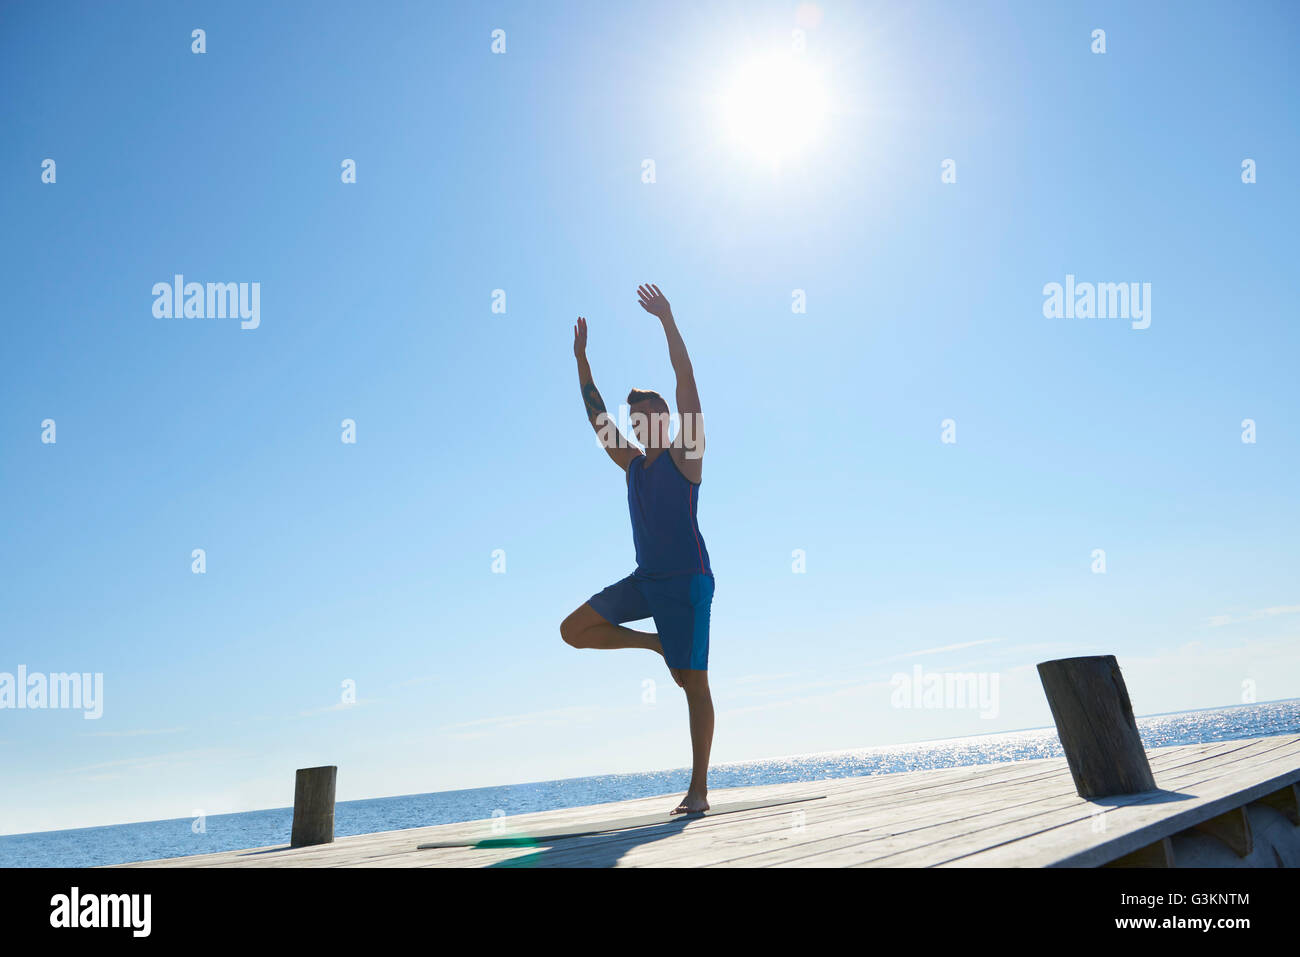 Man on pier standing on one leg arms raised exercising Stock Photo